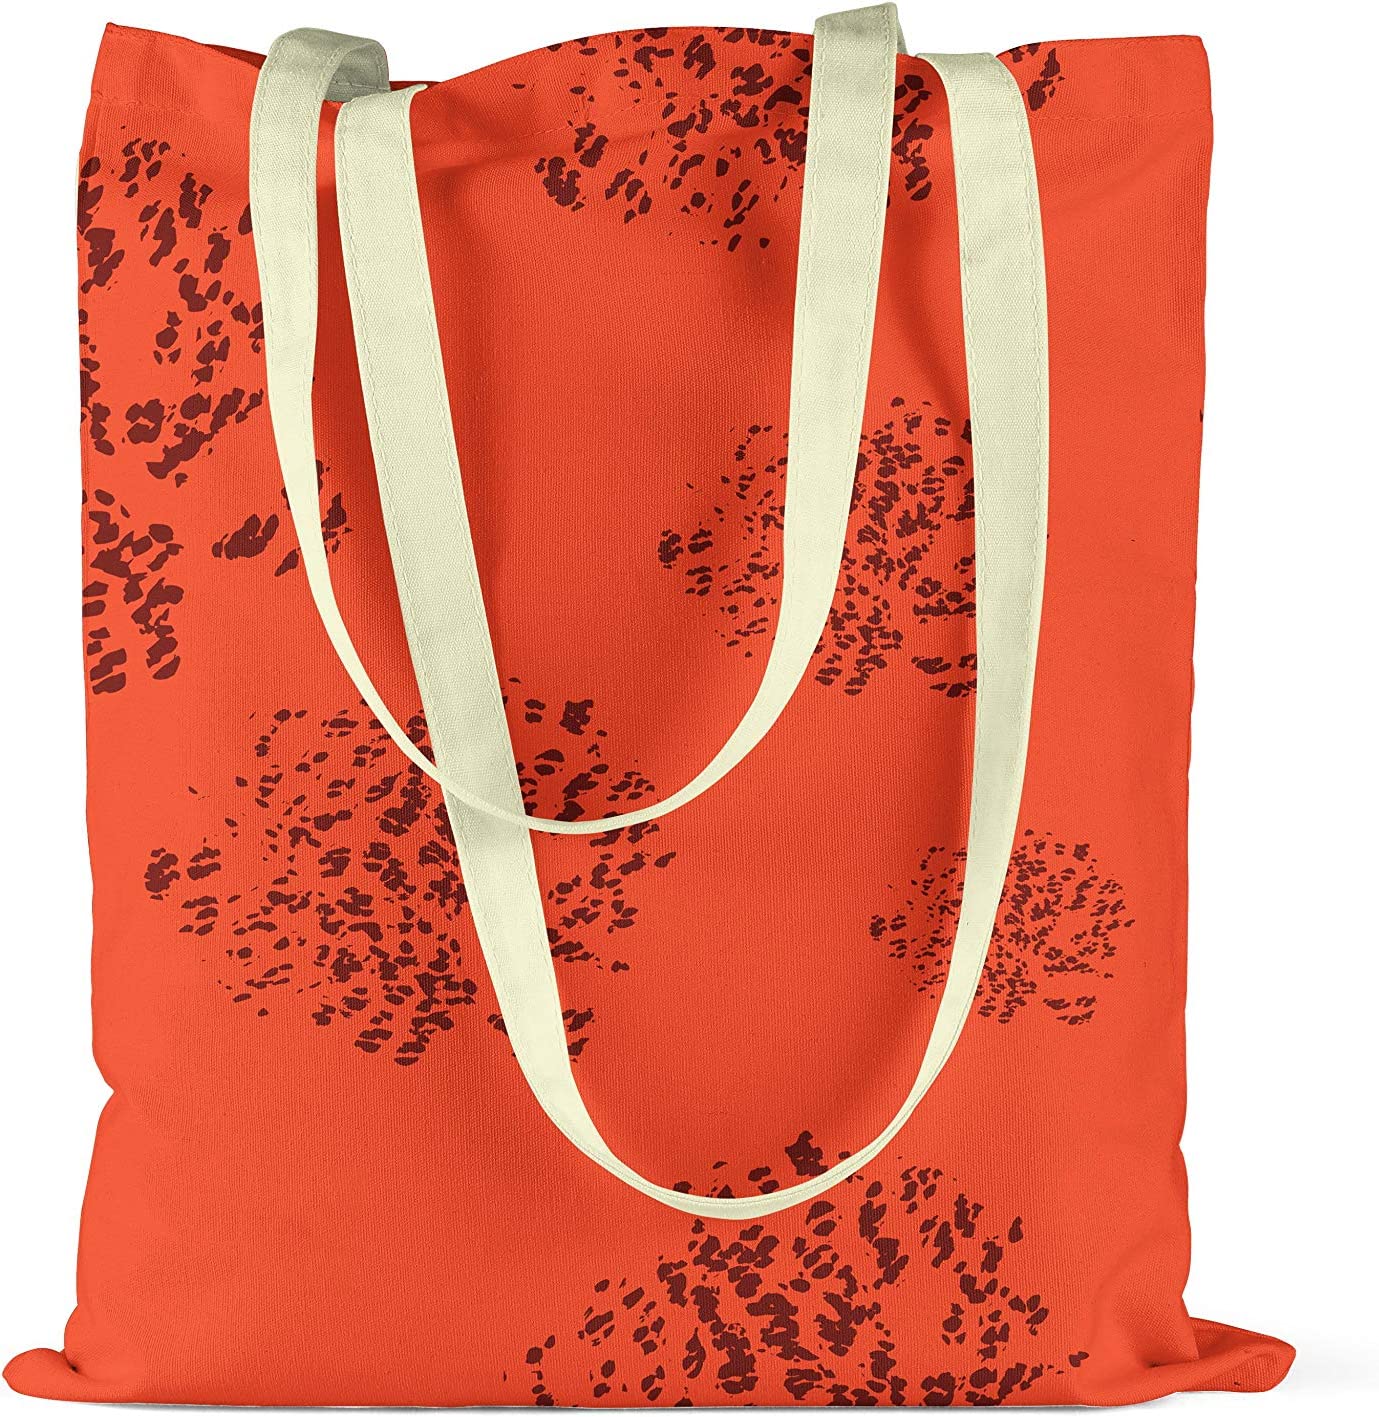 Bonamaison Speckled Design Printed Red Tote Bag 34 x 40cm RRP 5.99 CLEARANCE XL 3.99